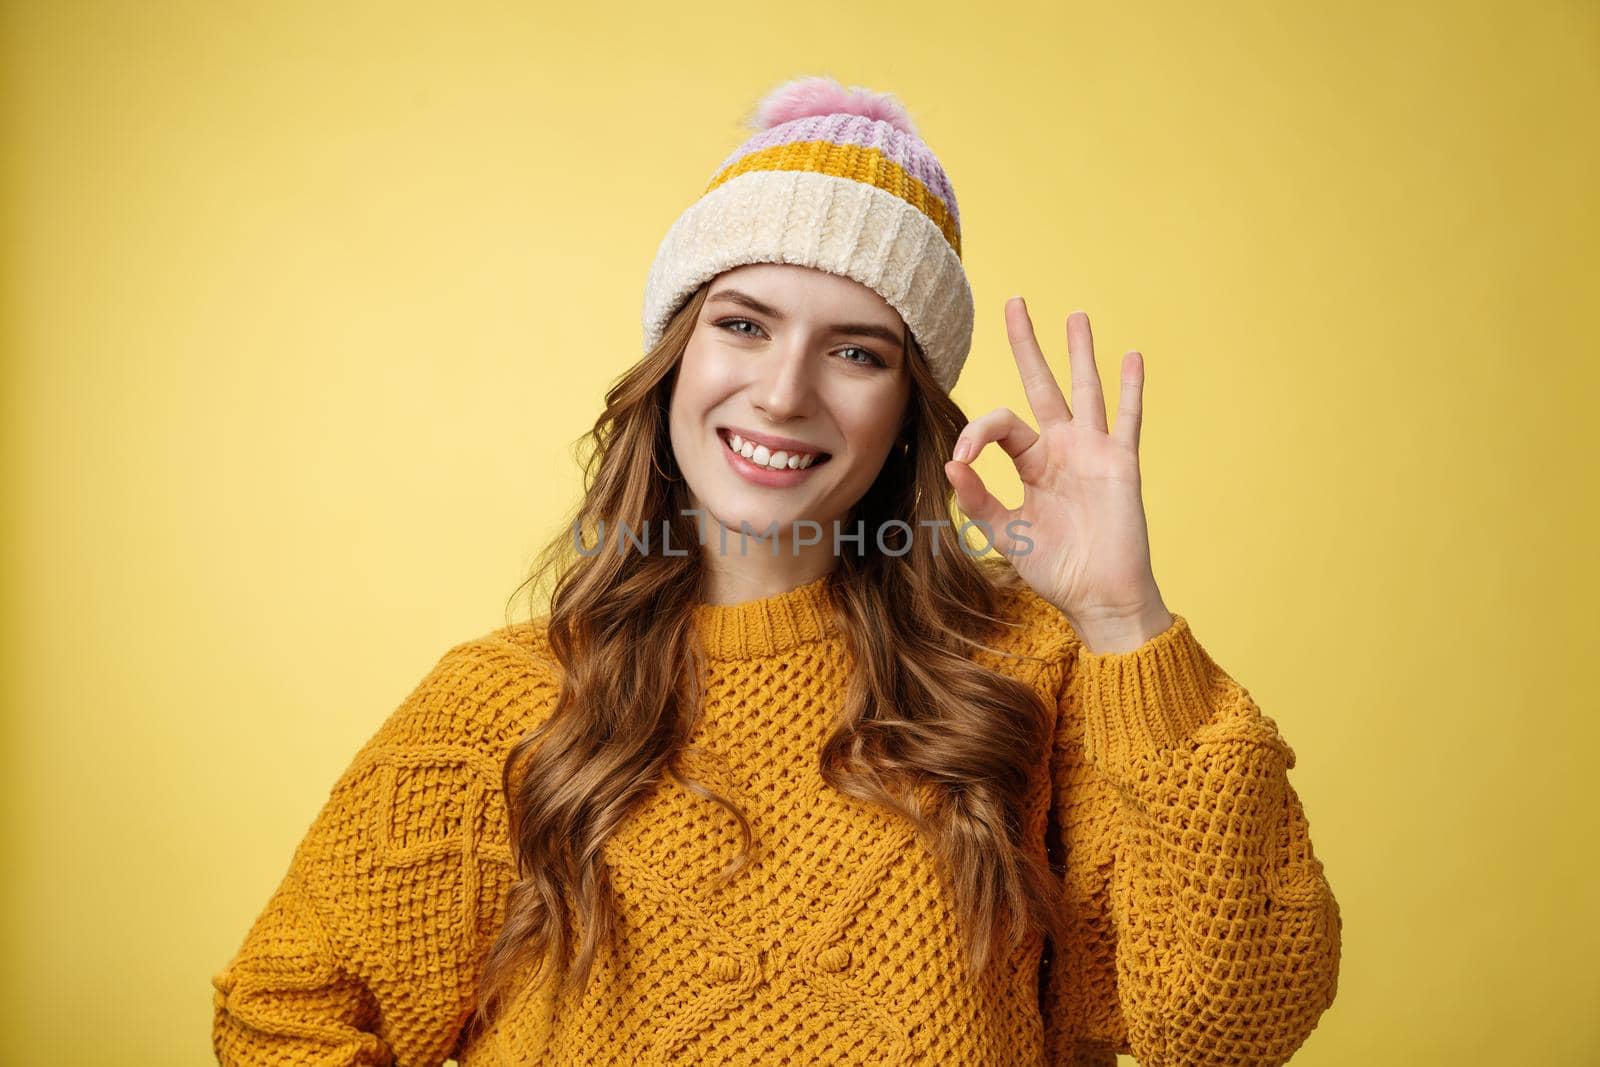 Everything under control. Self-assured optimstic lucky cute girl show okay ok gesture smiling happily having things alright, fine recommend awesome product, pleased standing yellow background.